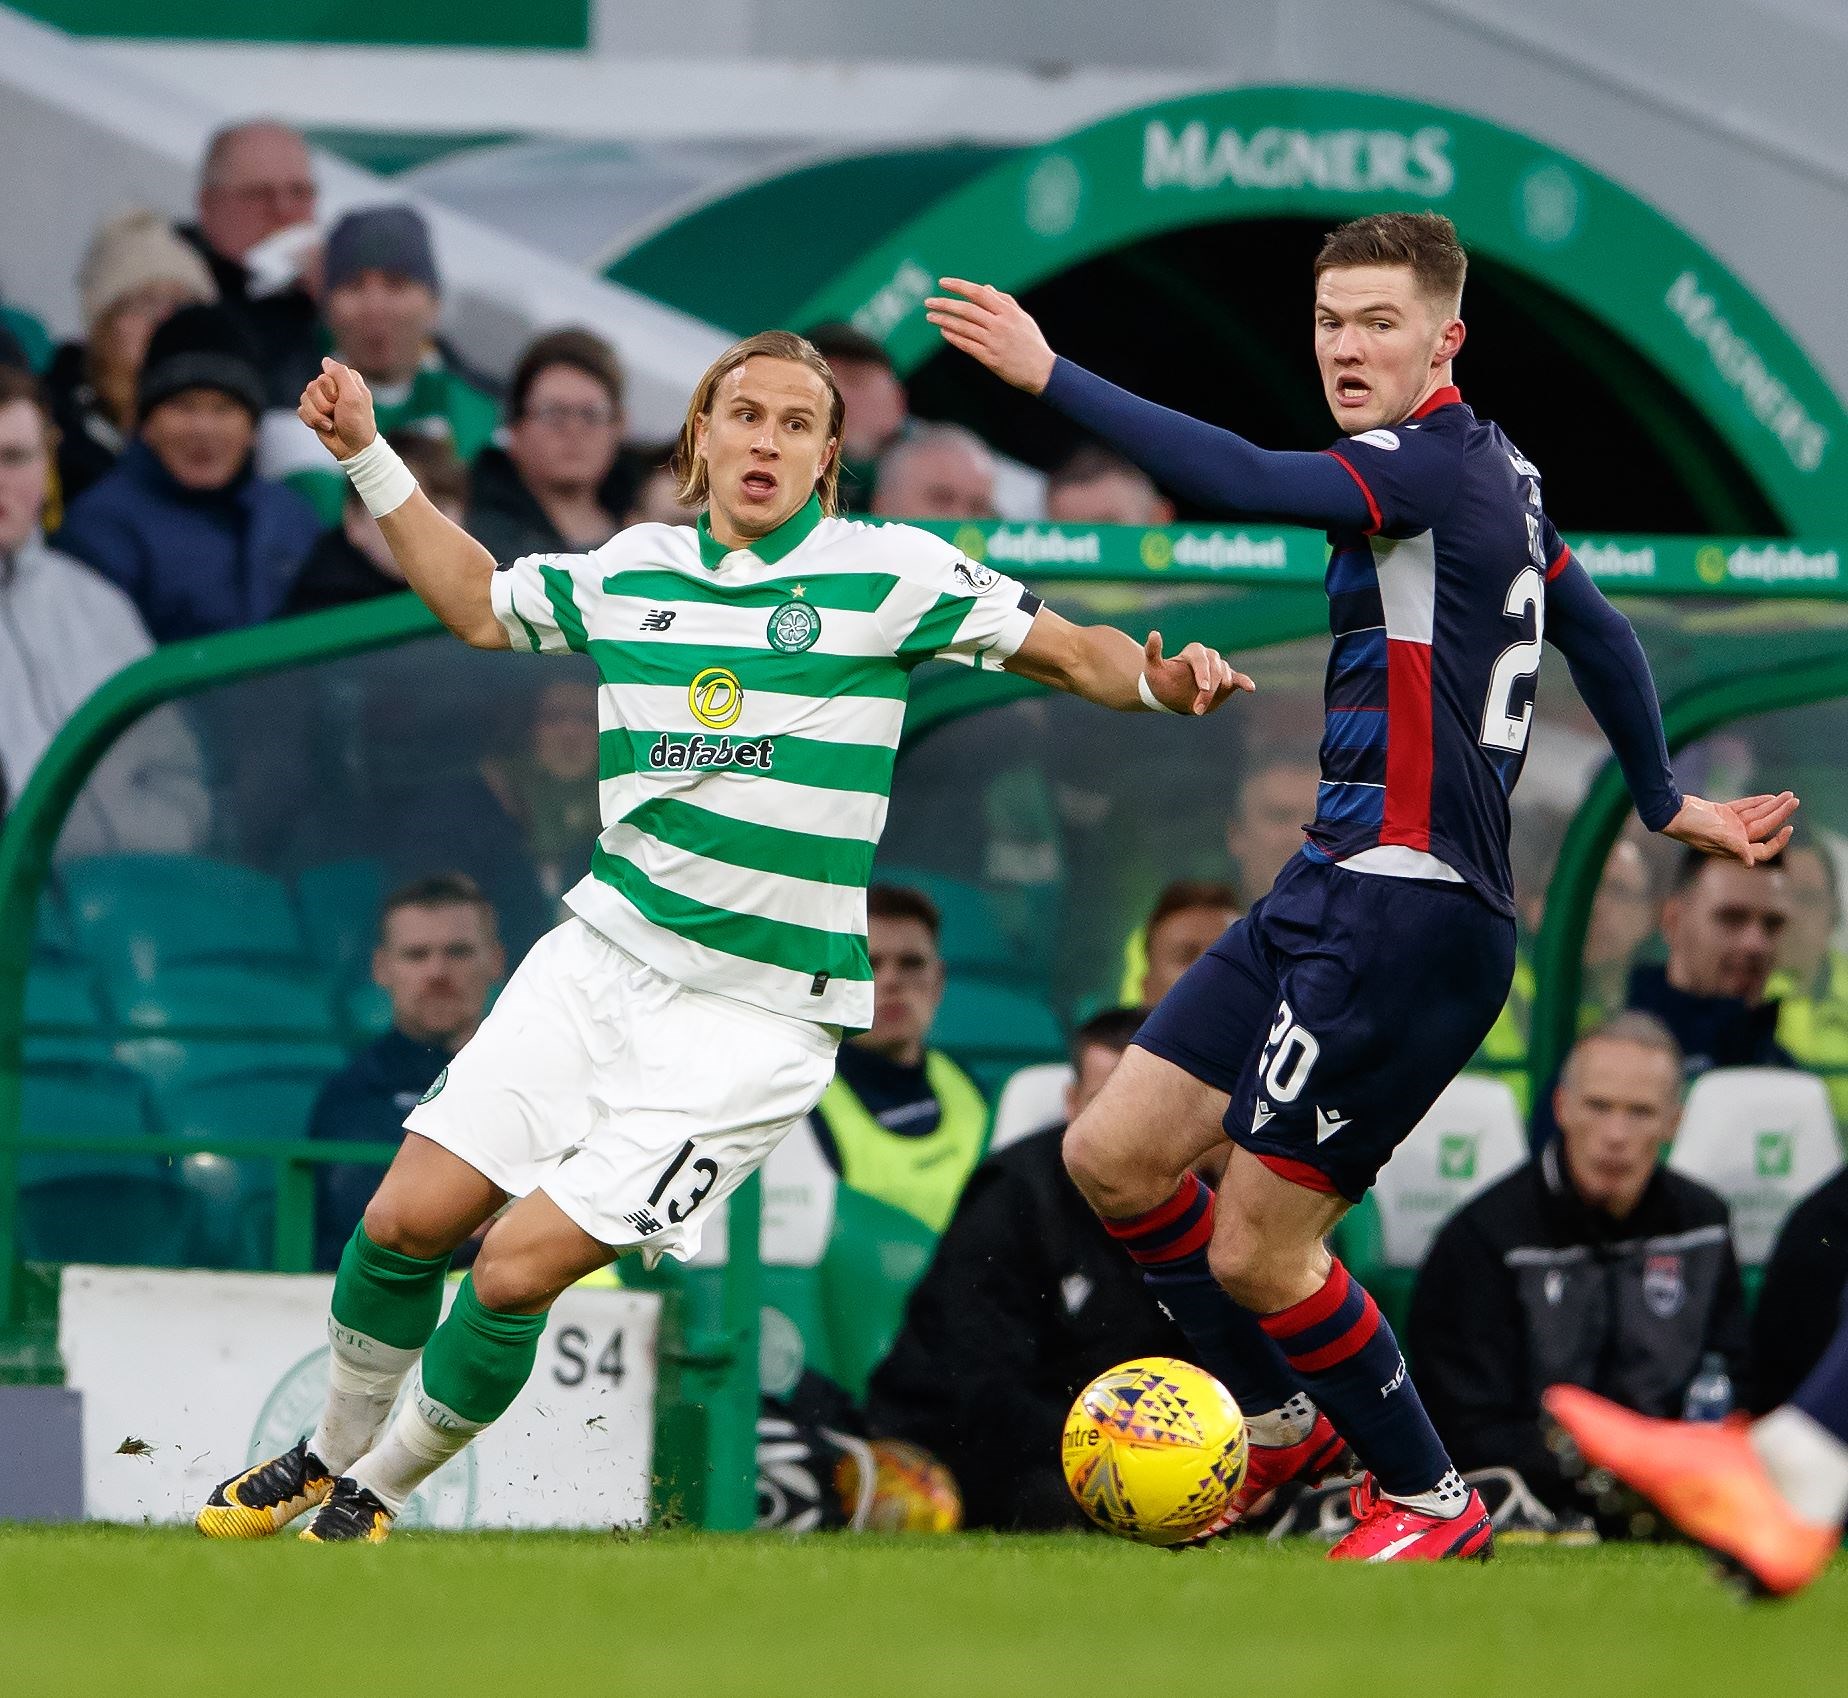 Picture - Ken Macpherson, Inverness. Celtic(3) v Ross County(0). 26.01.20. Ross County's Blair Spittal and Celtic's Moritz Bauer.